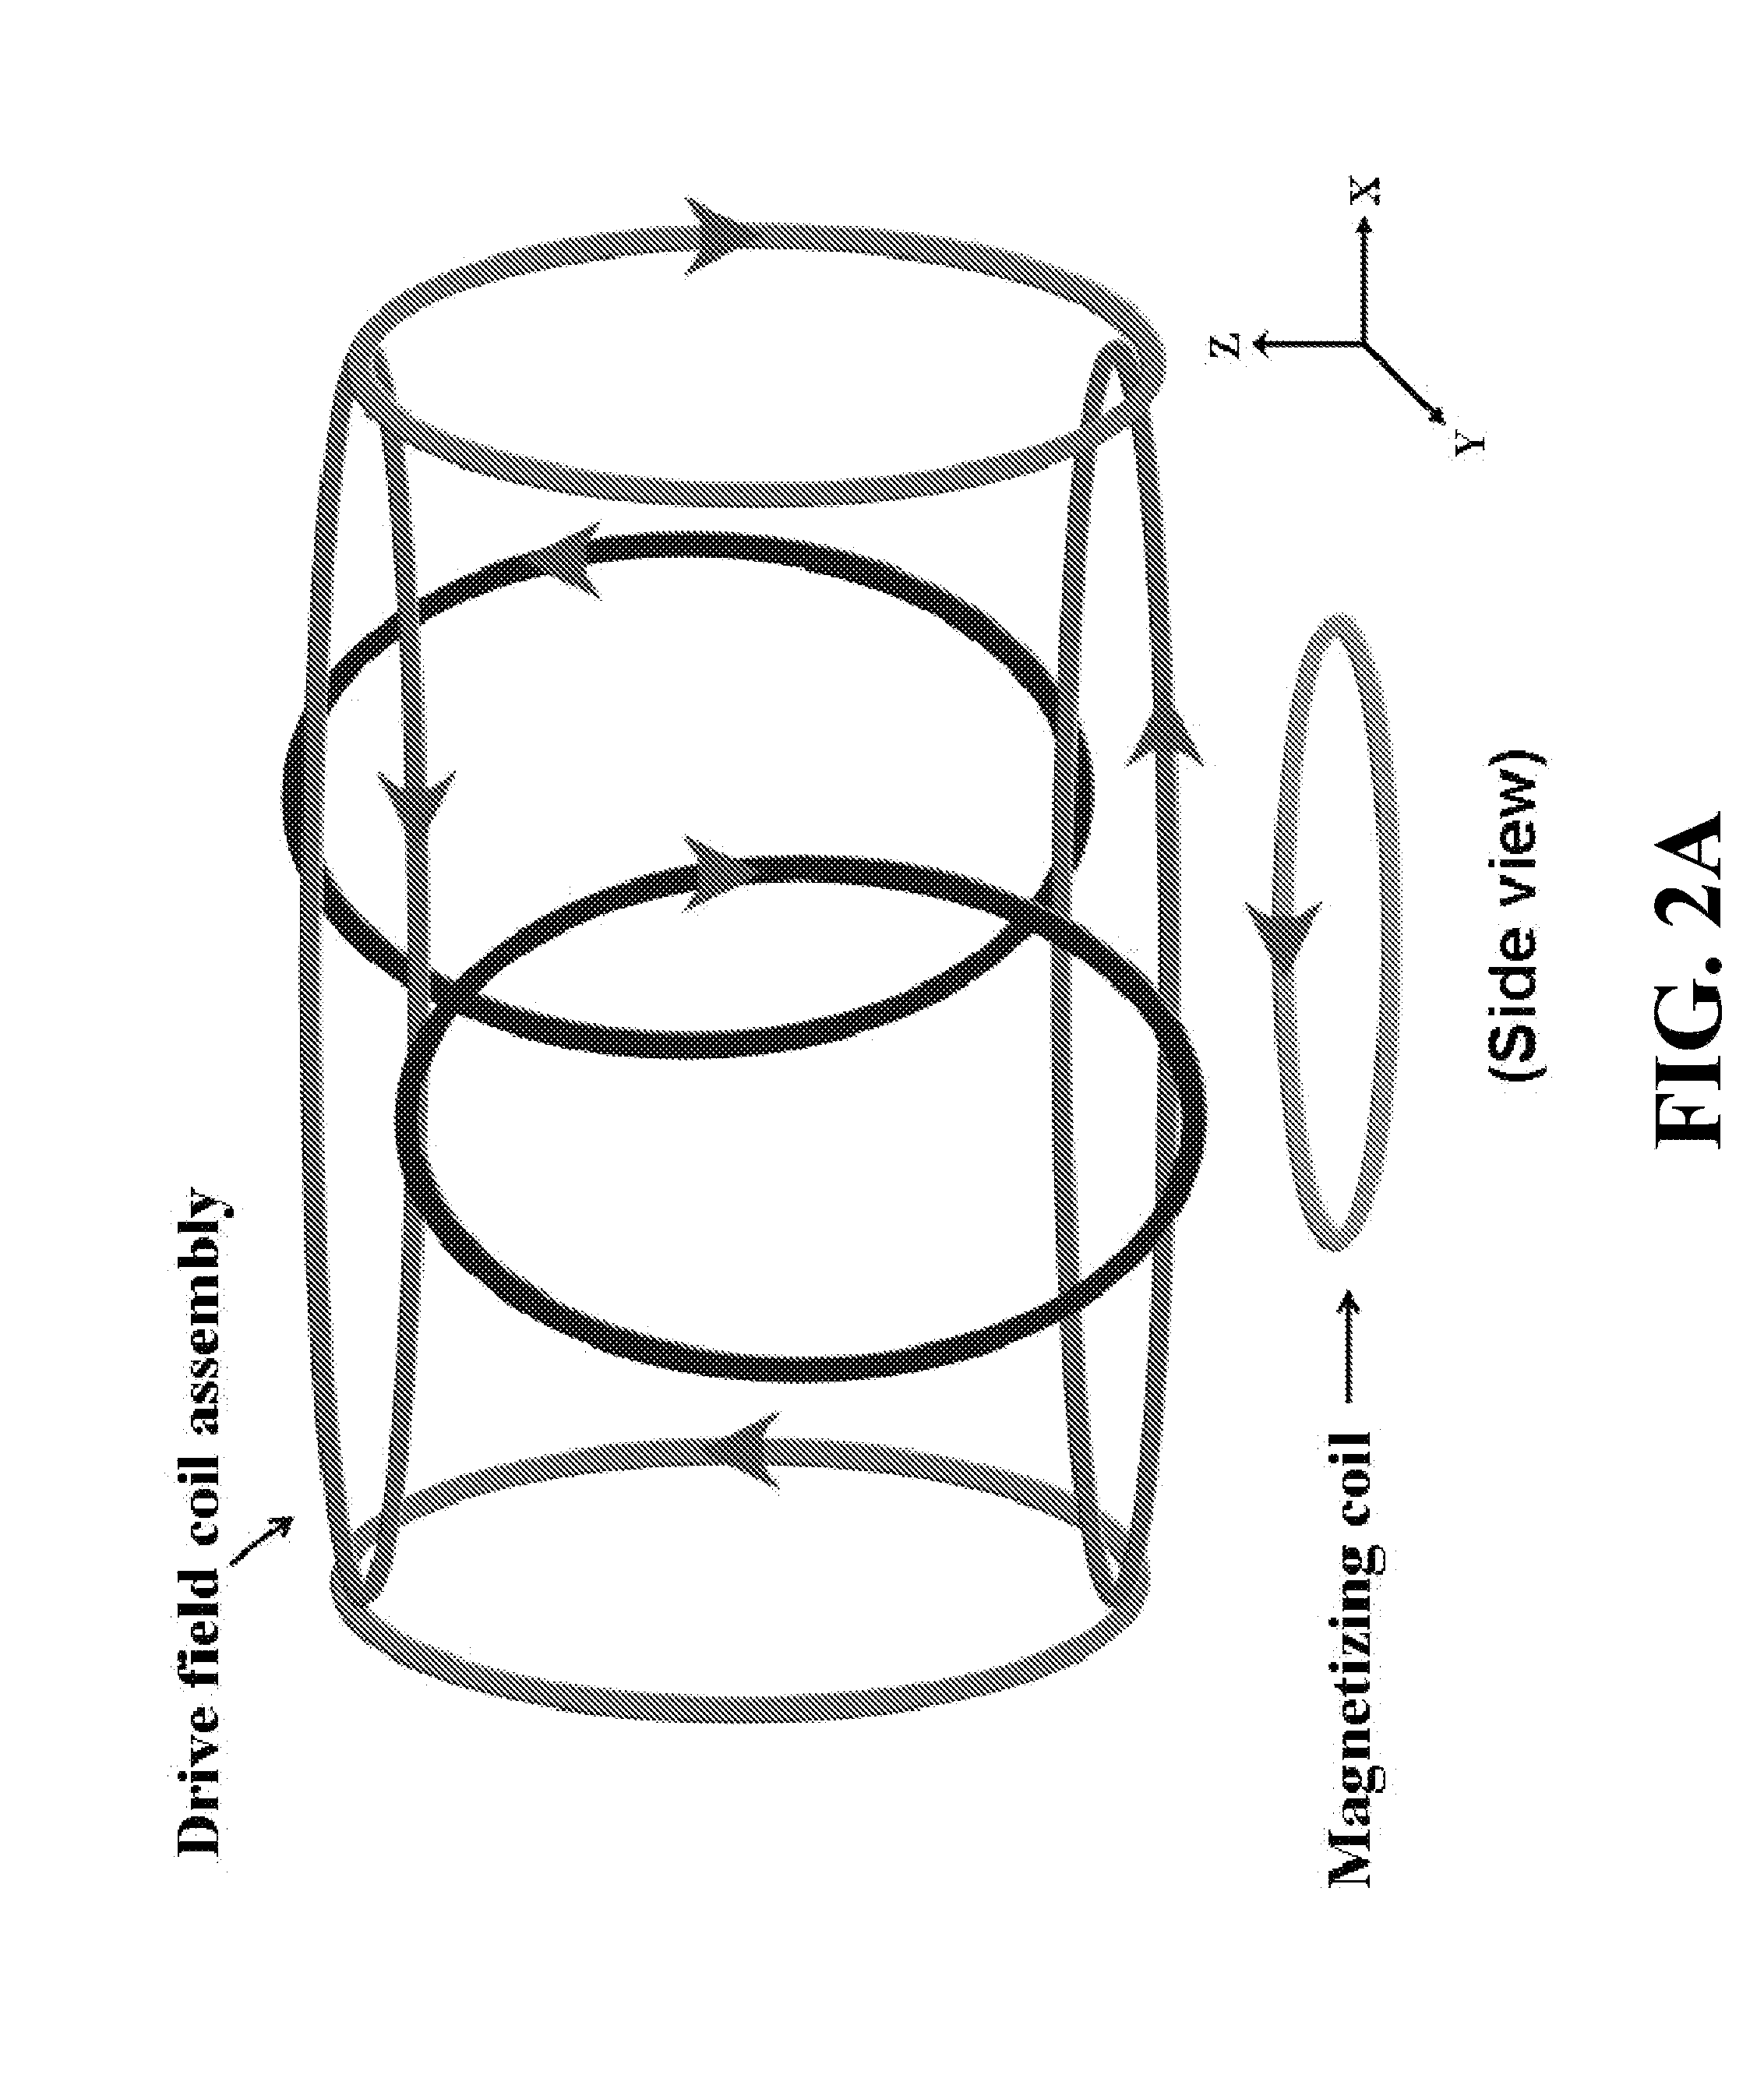 Imaging method for obtaining spatial distribution of nanoparticles in the body